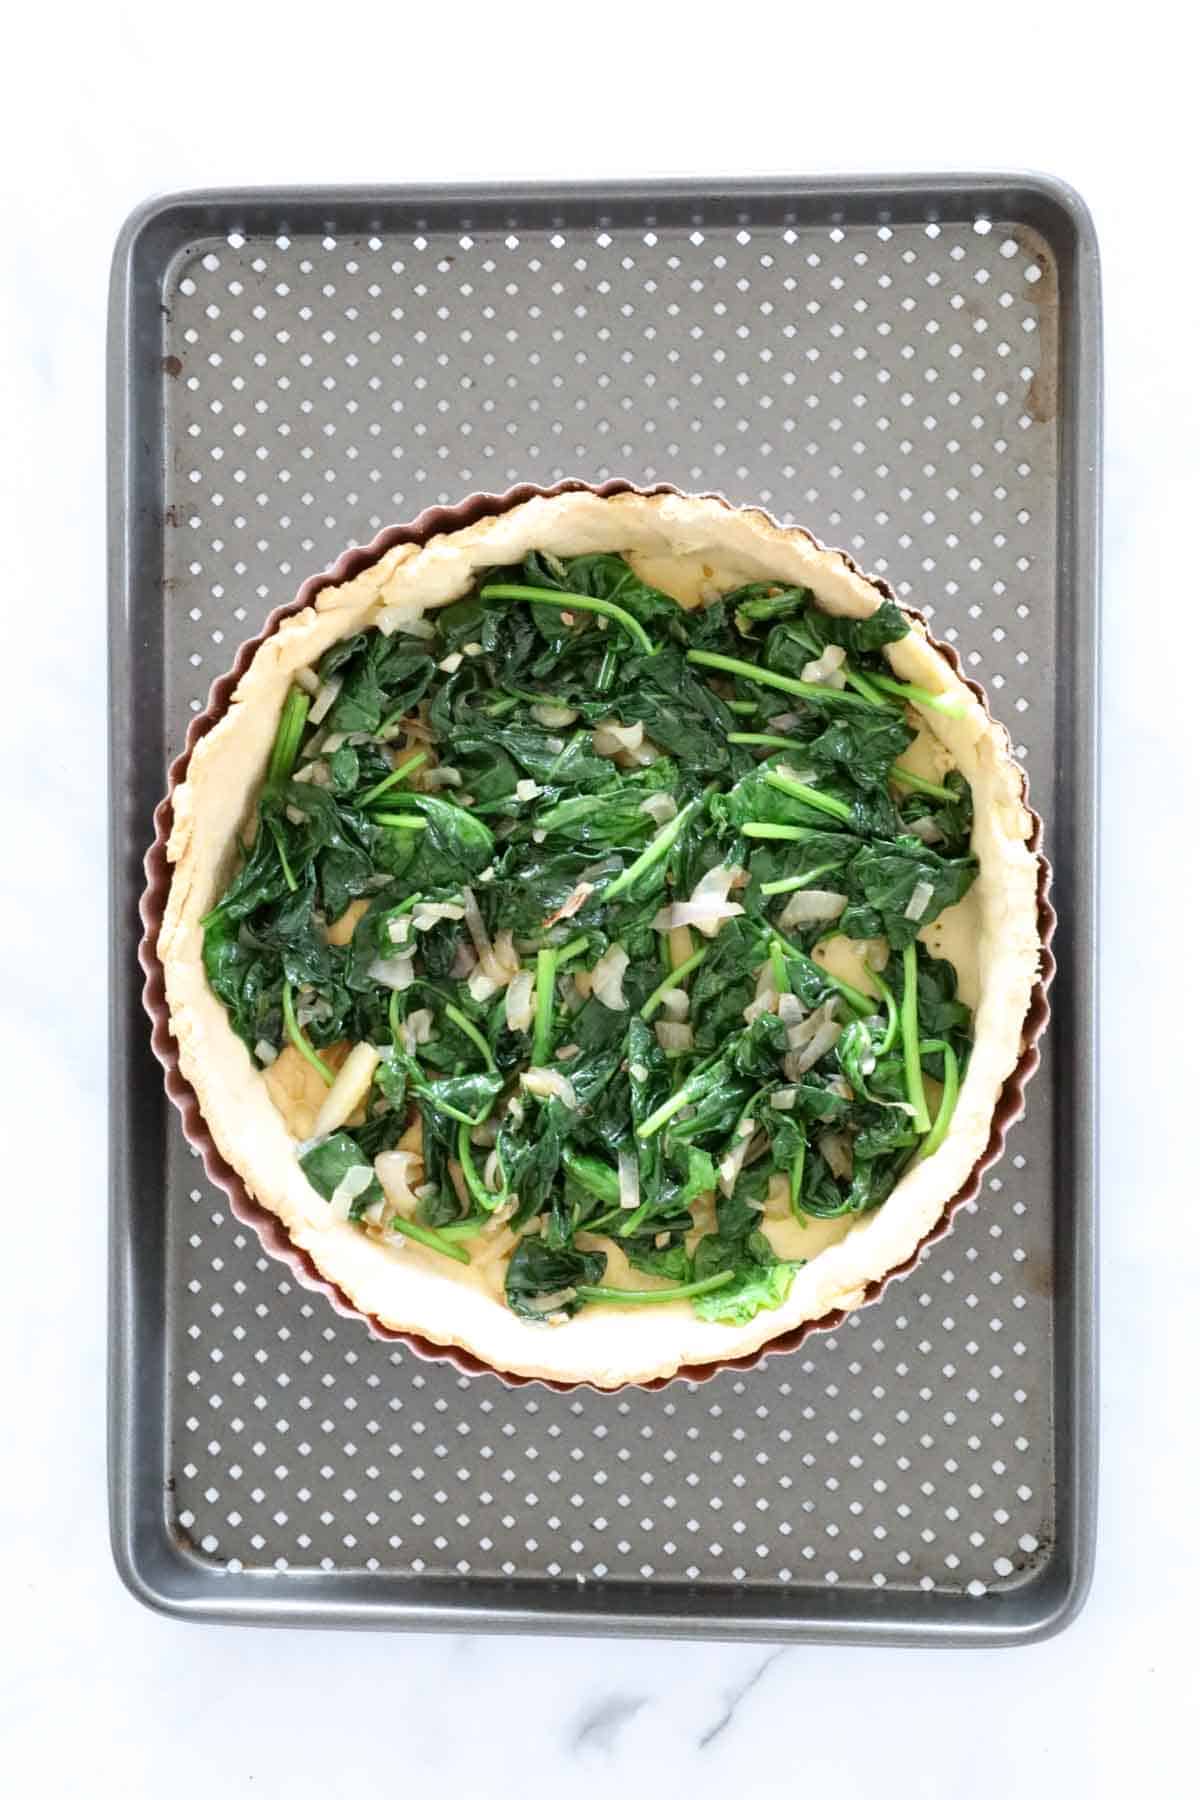 Spinach and shallots spread over baked pastry shell.